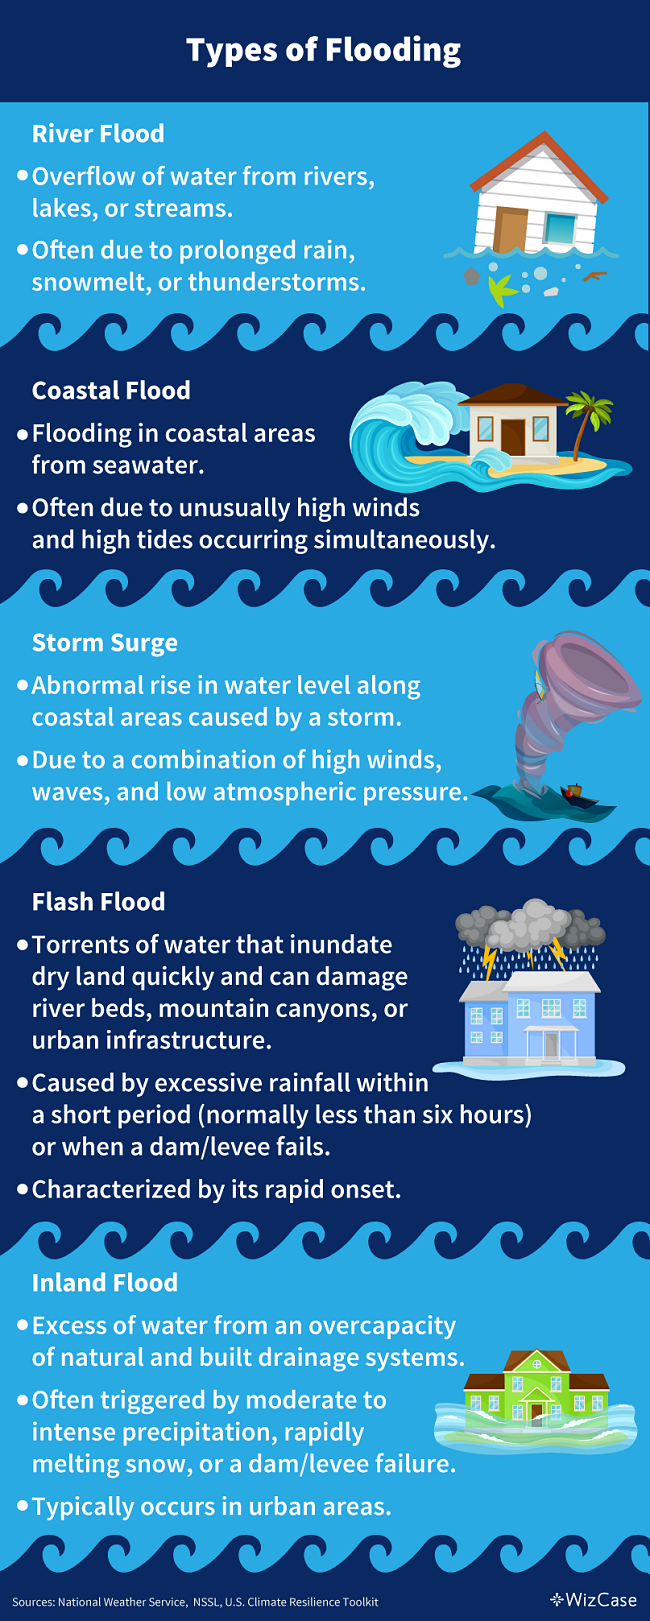 The different types of flooding